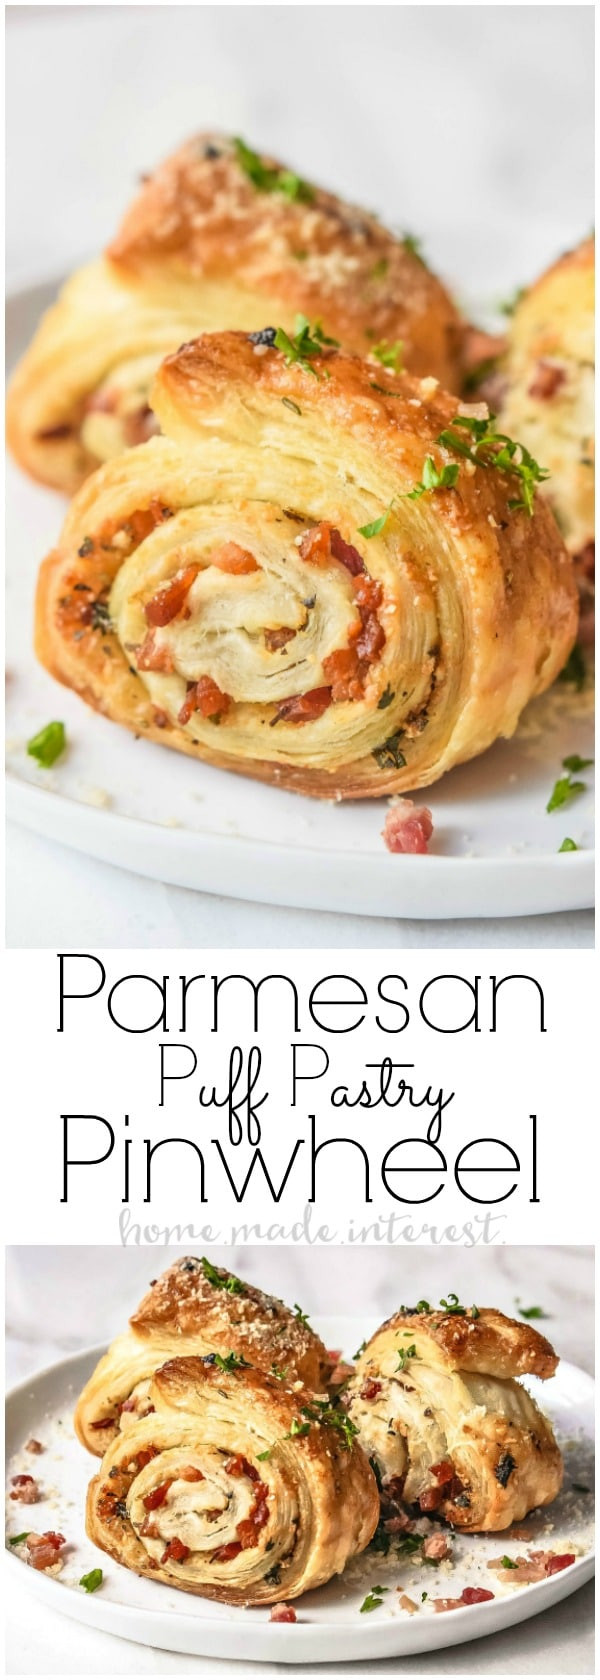 Puffed Pastry Appetizers Recipes
 Parmesan Puff Pastry Pinwheels Home Made Interest